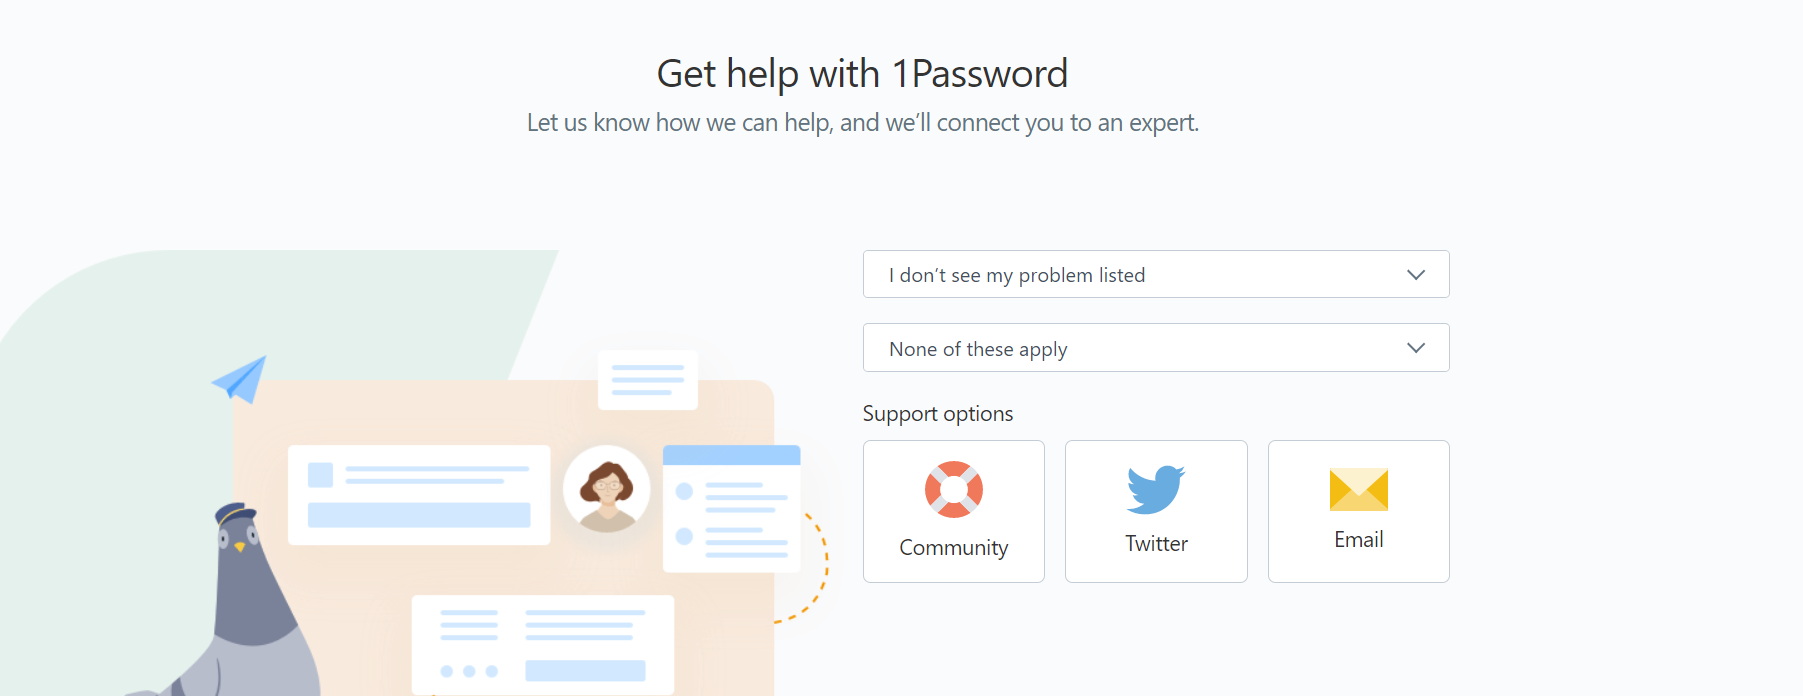 1Password contact support